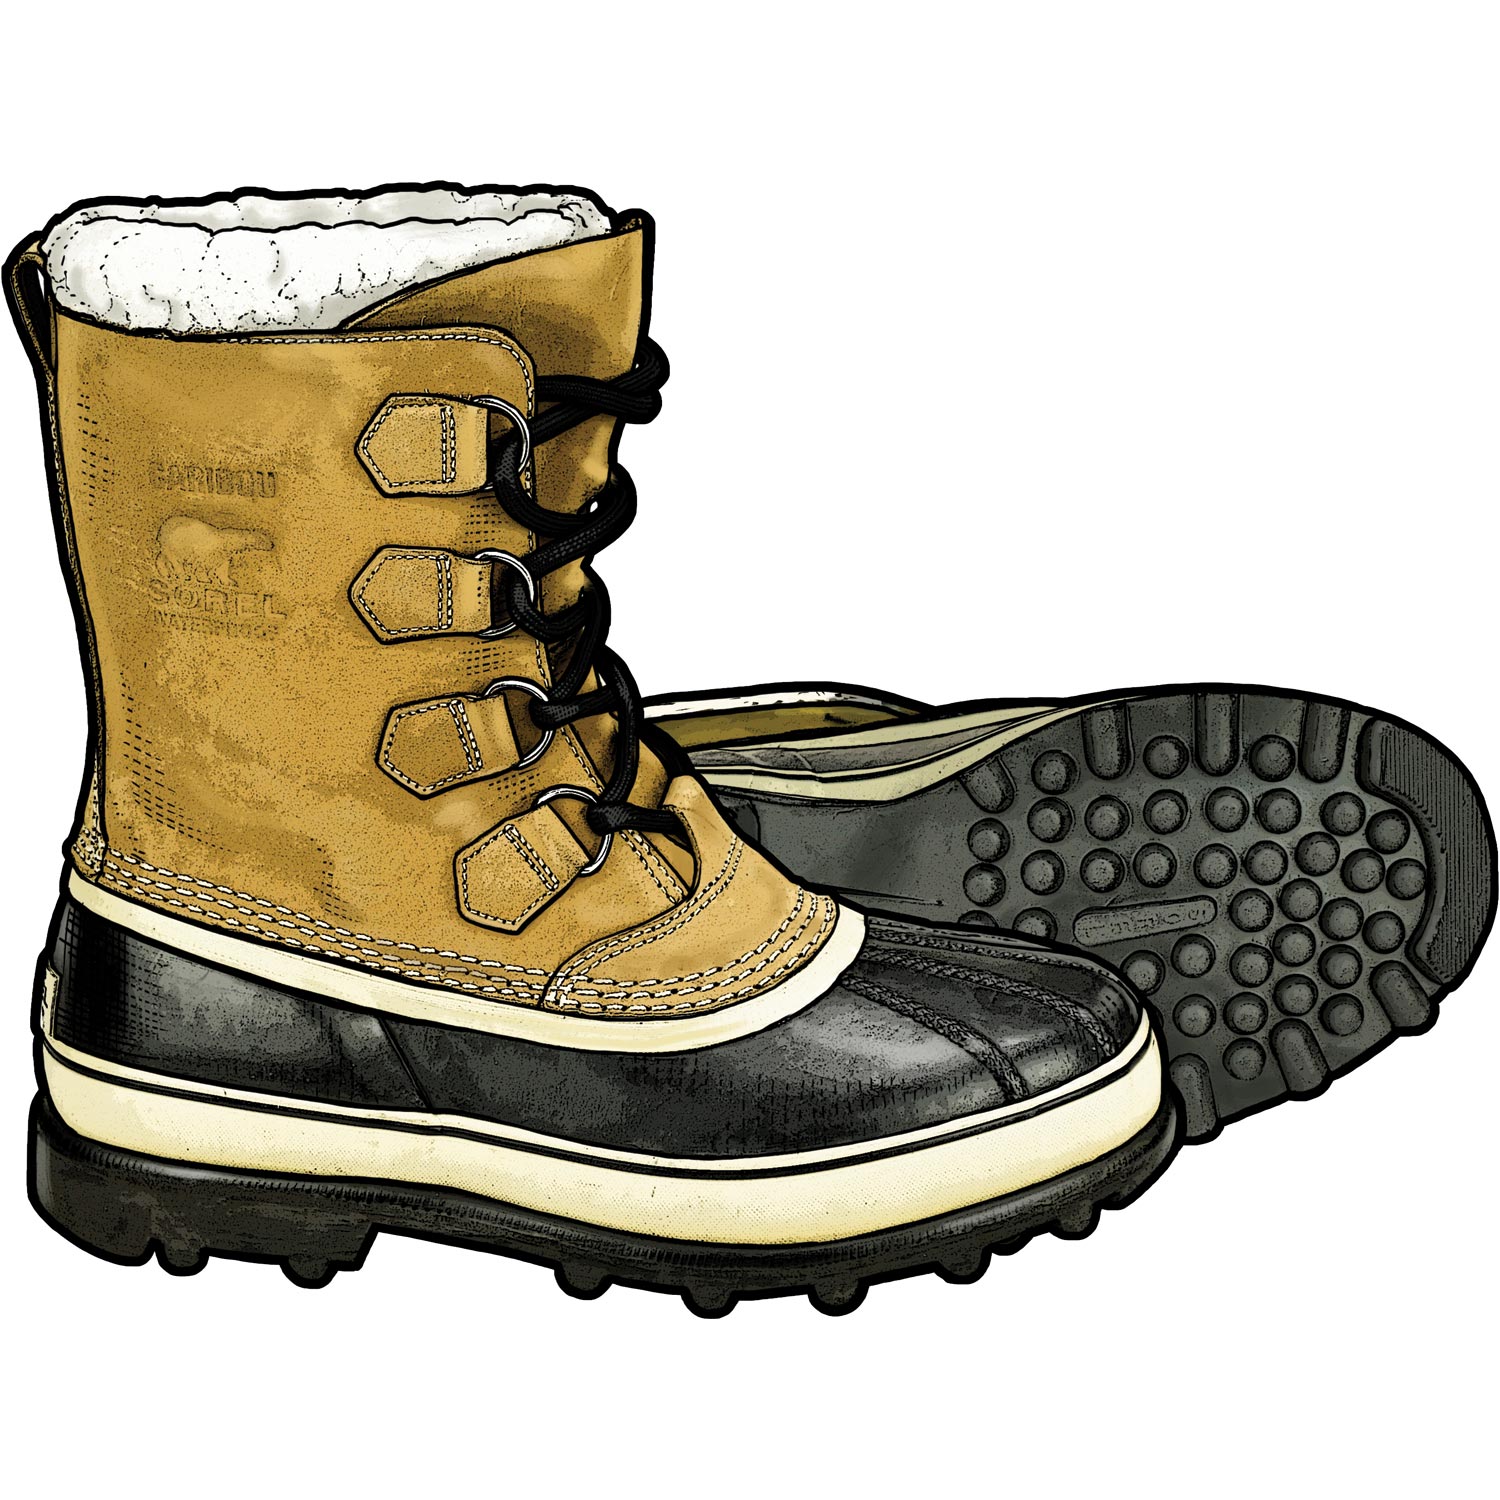 Boots clipart snow boot. Sorel caribou winter duluth